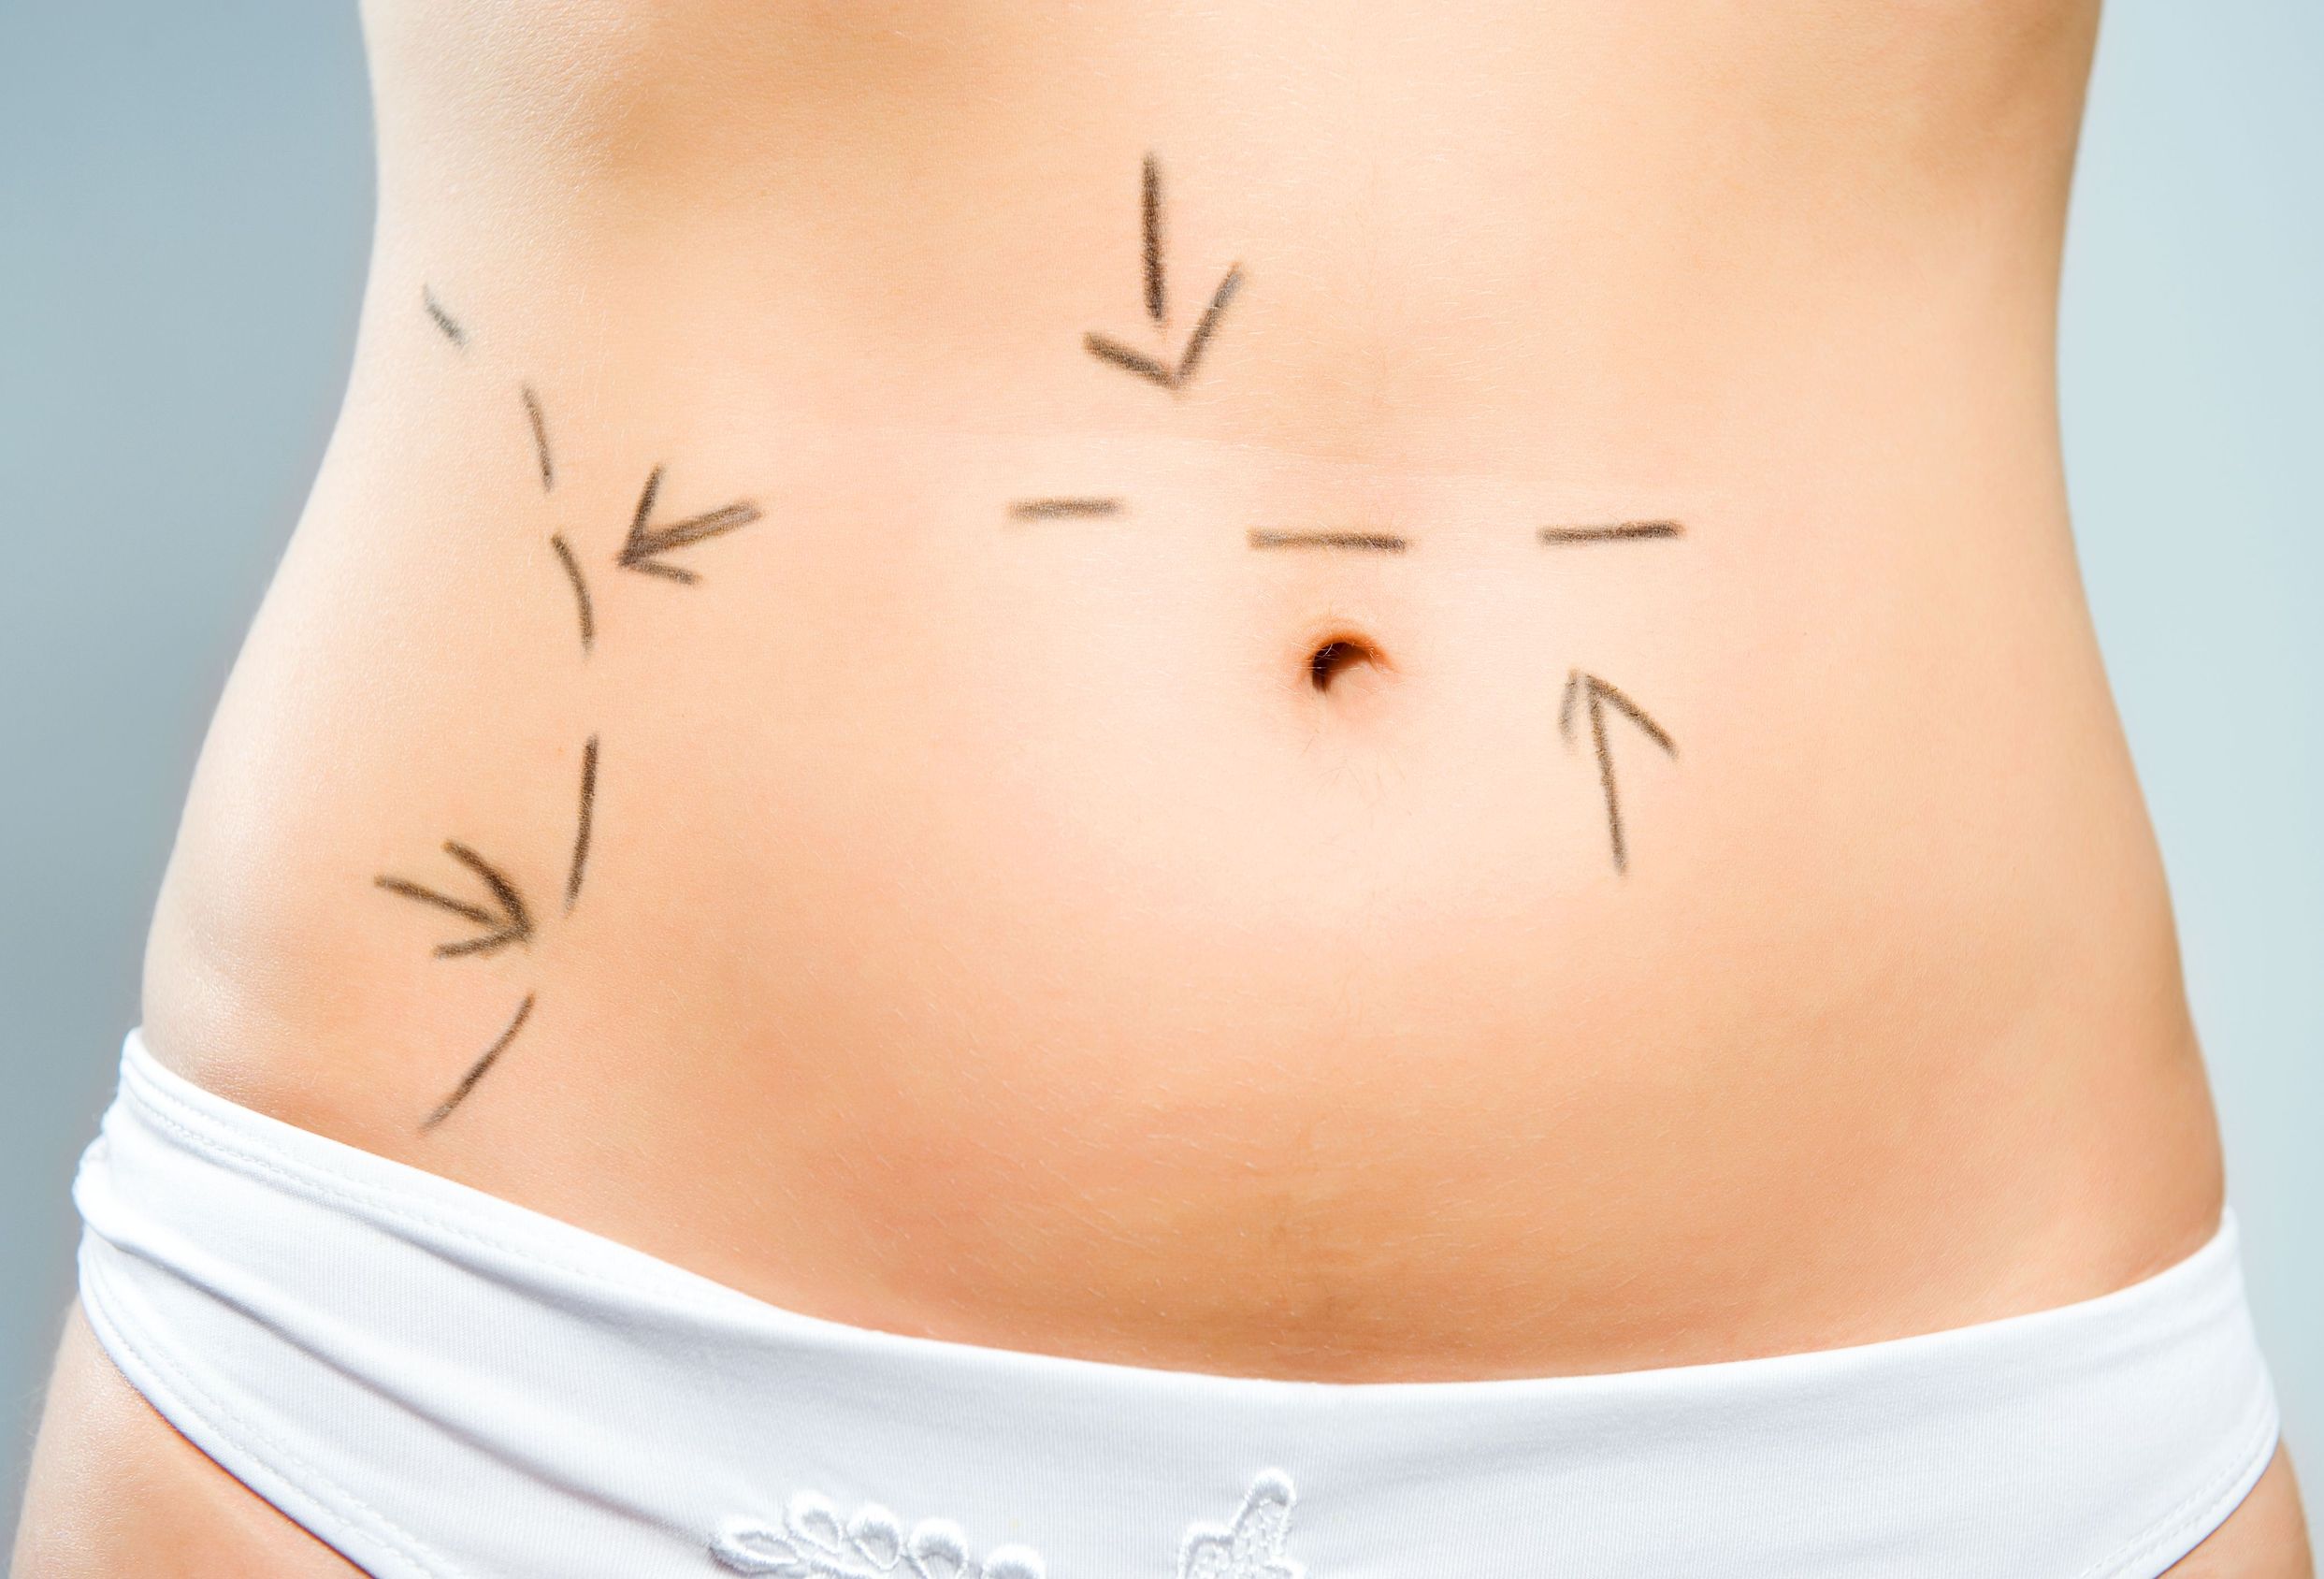 Tummy Tuck in Hinsdale: What to Expect